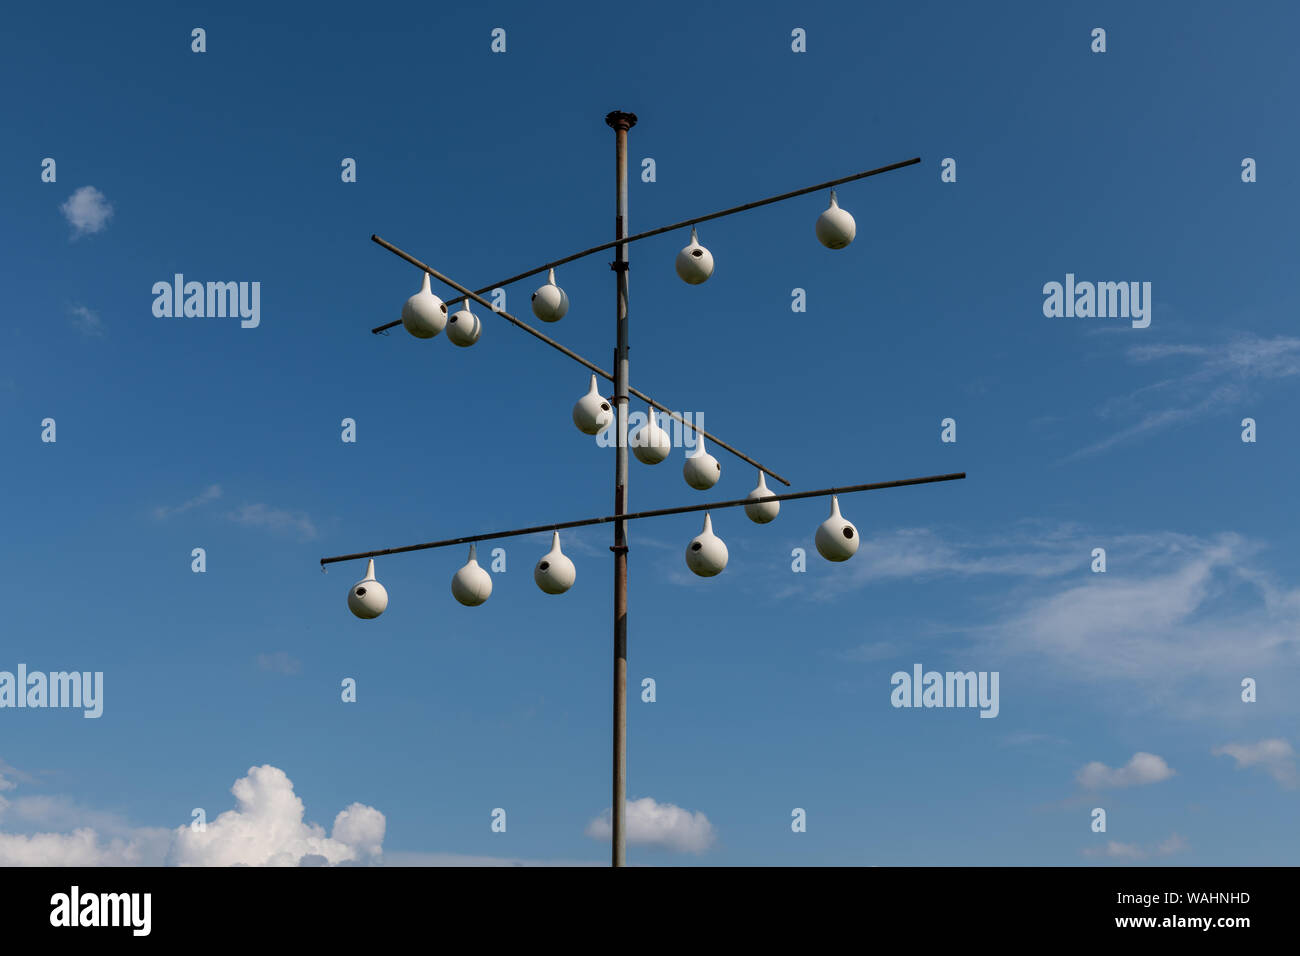 A purple martin gourd rack in front of a blue sky. Stock Photo